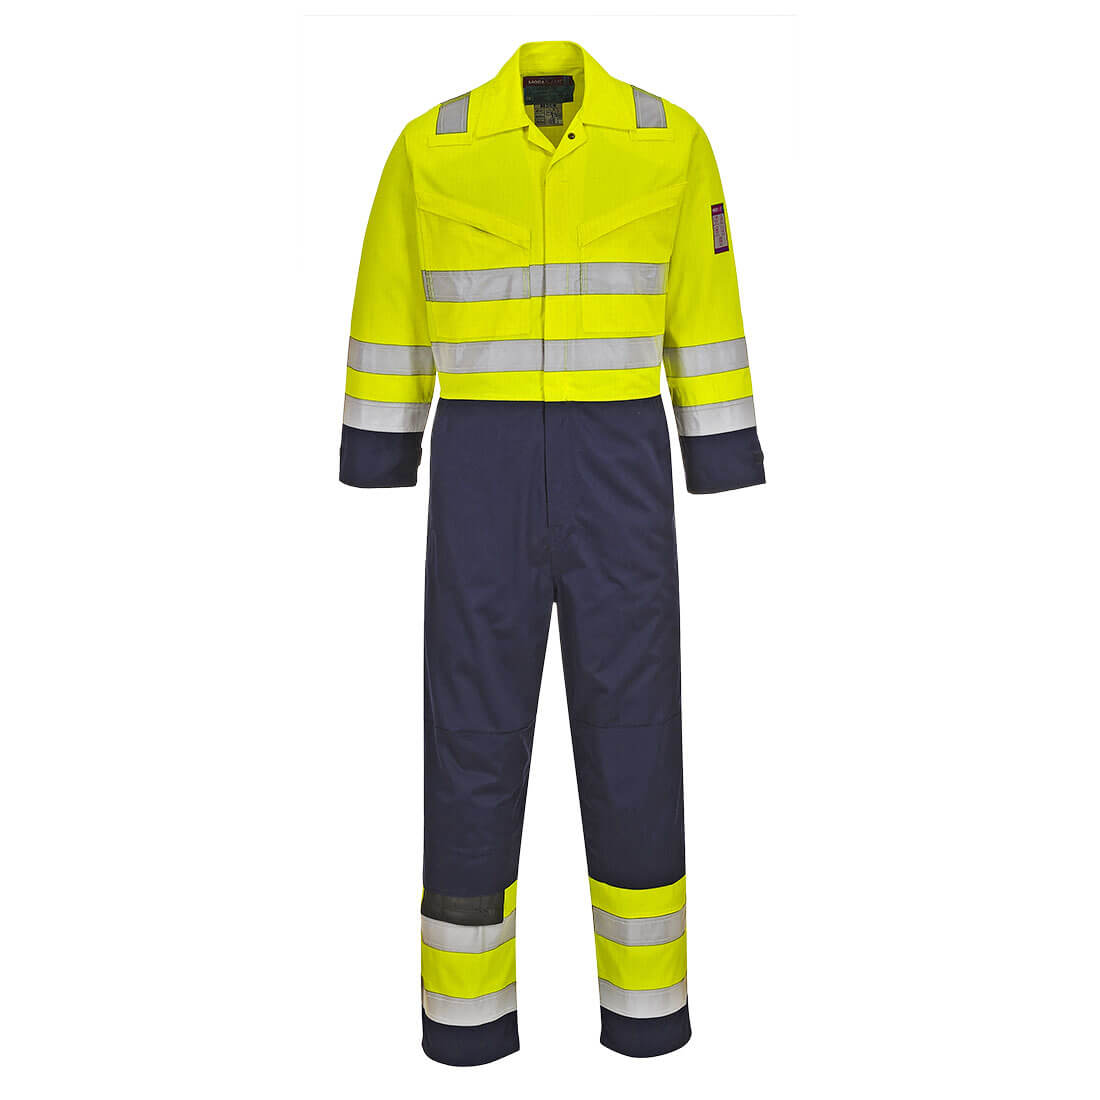 Image of Modaflame Flame Resistant Hi Vis Overall Yellow / Navy M 32"